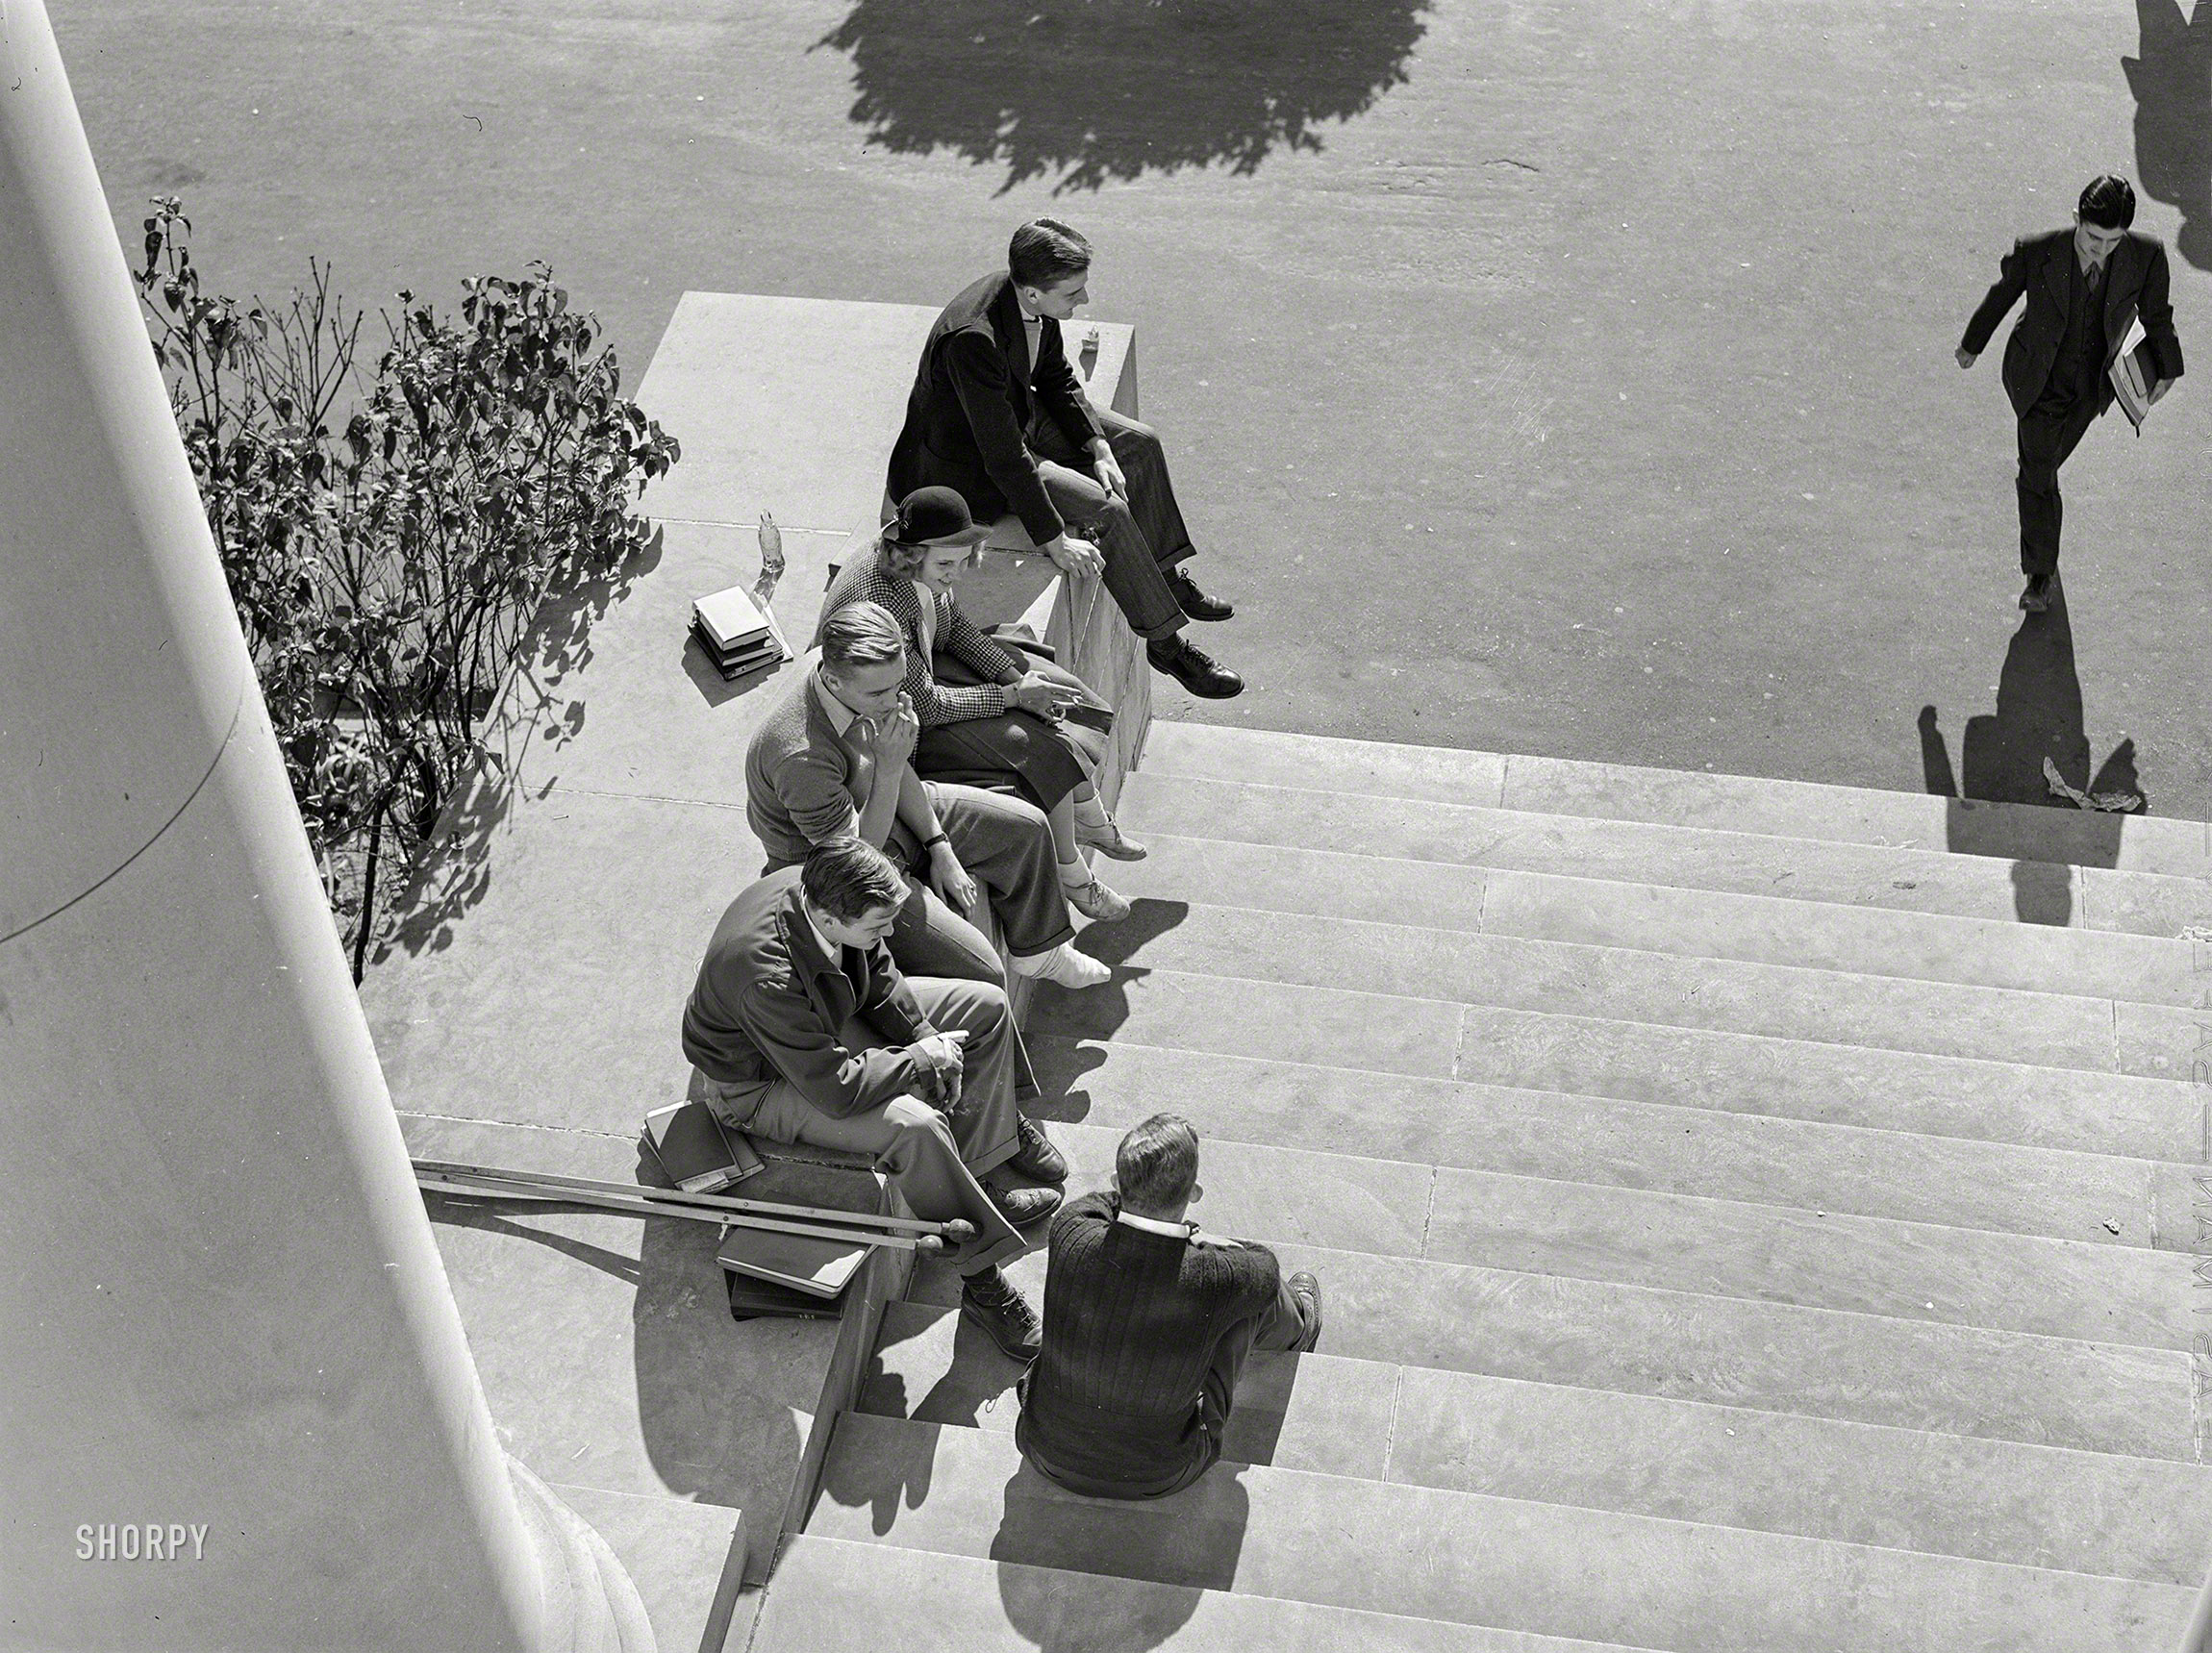 September 1939. "Students on steps of building between classes. University of North Carolina, Chapel Hill, Orange County." Medium format negative by Marion Post Wolcott for the Farm Security Administration. View full size.